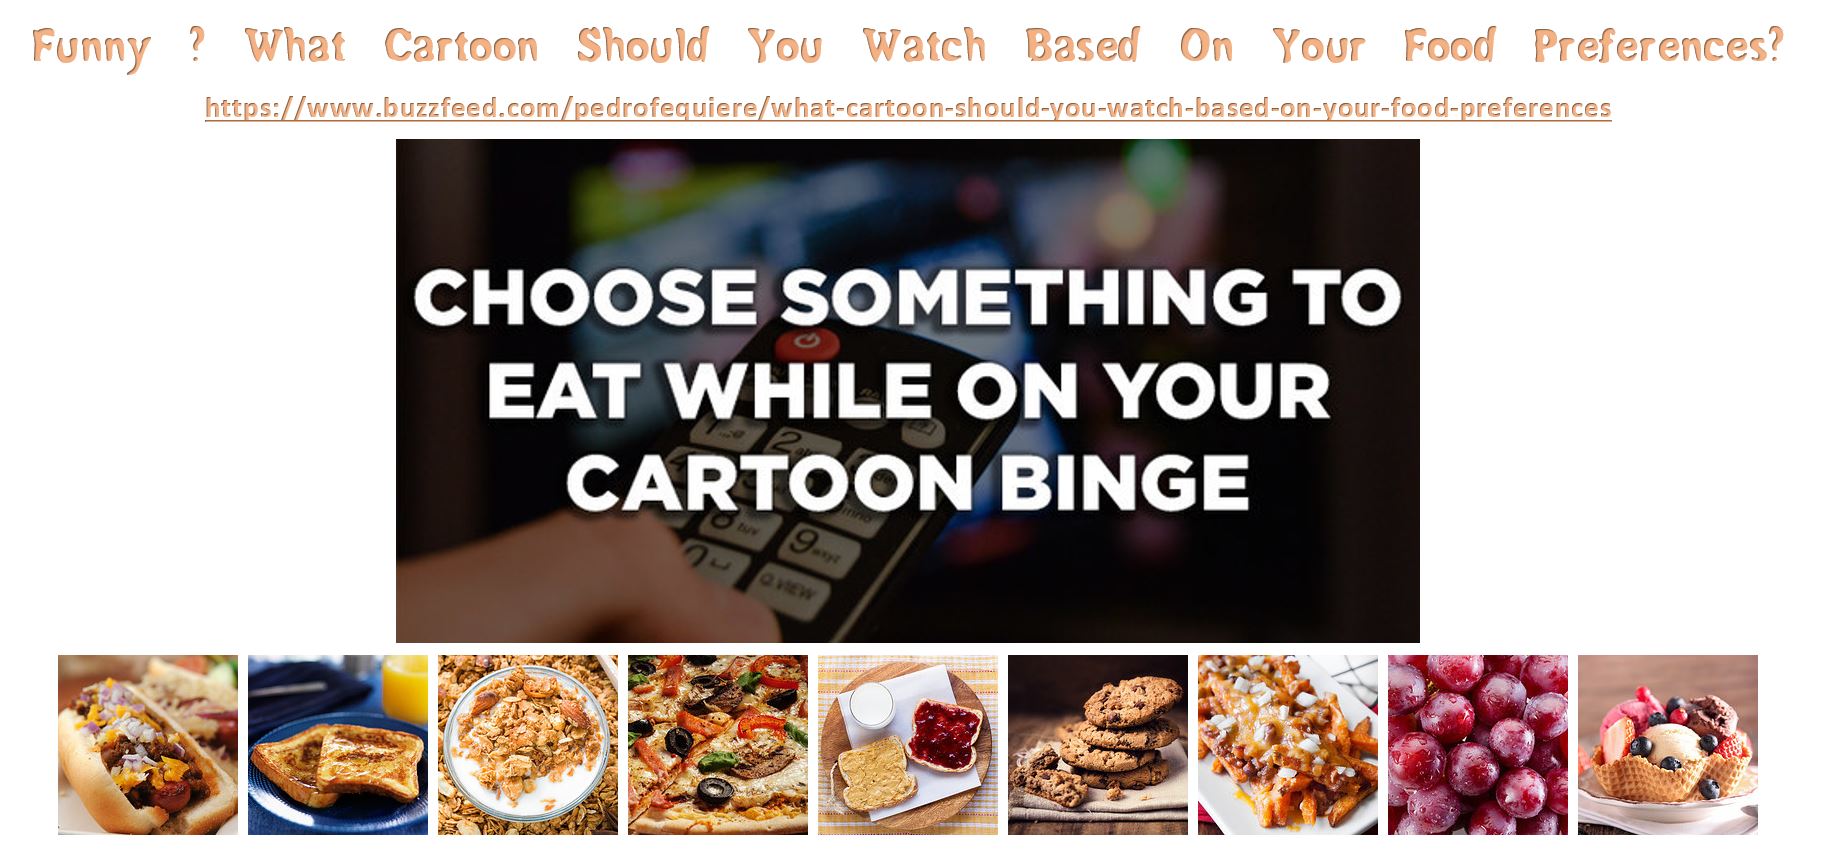 5-what-cartoon-should-you-watch-based-on-your-food-preferences